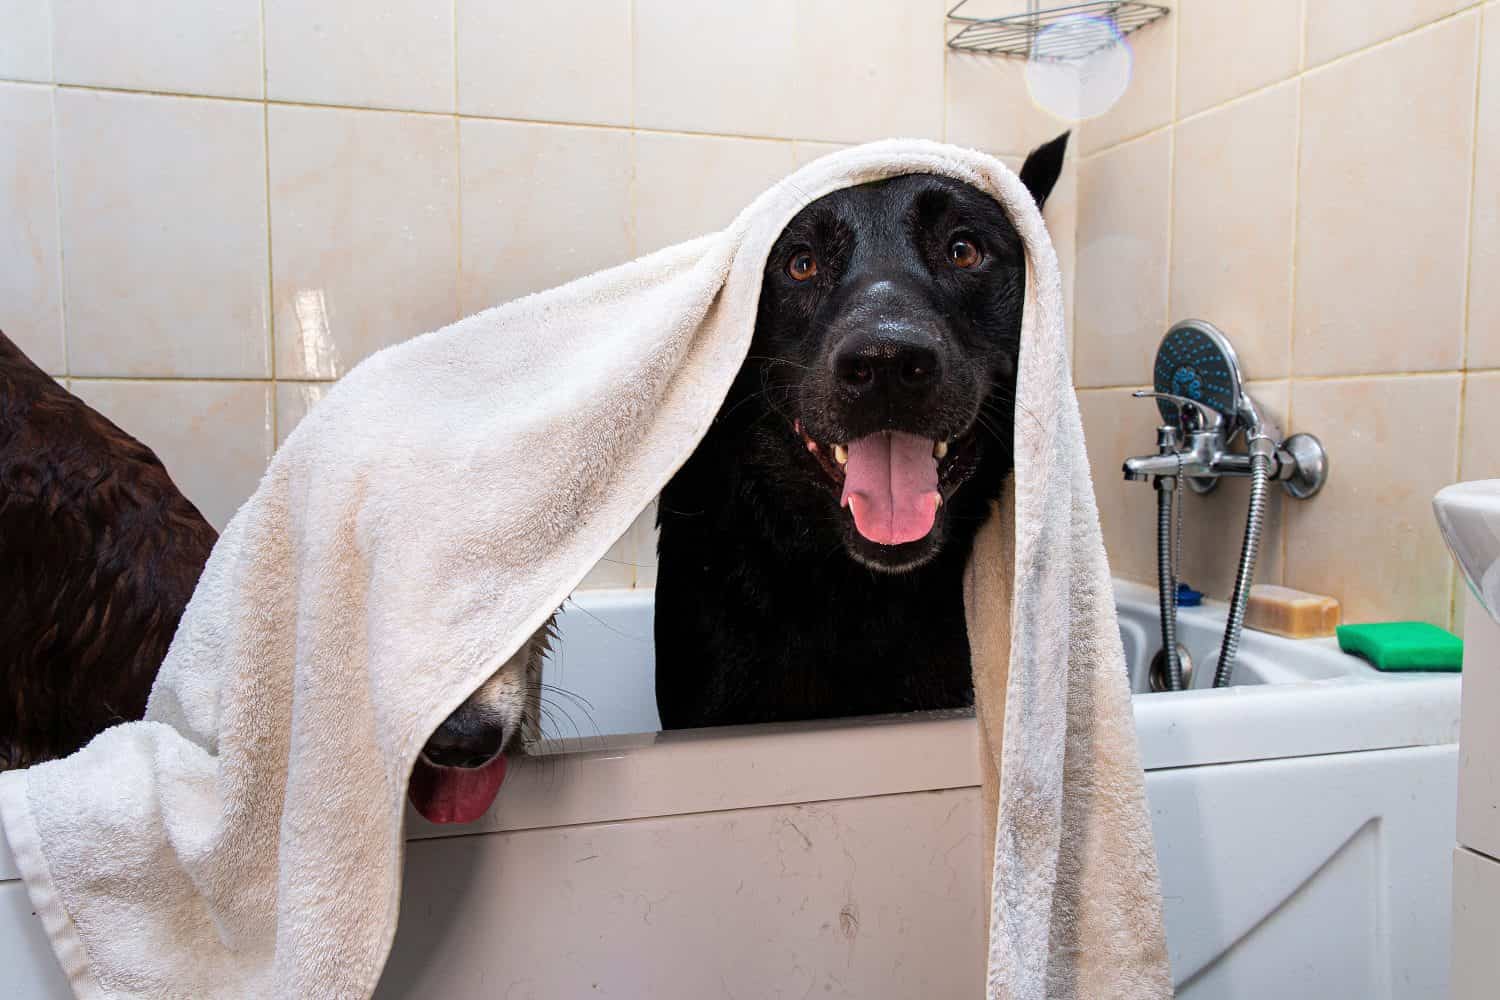 Obedient adult black and brown Shepherd dogs with mouths open and sticking out tongues hiding under towel while waiting finish of hygiene procedure in bathtub after walk